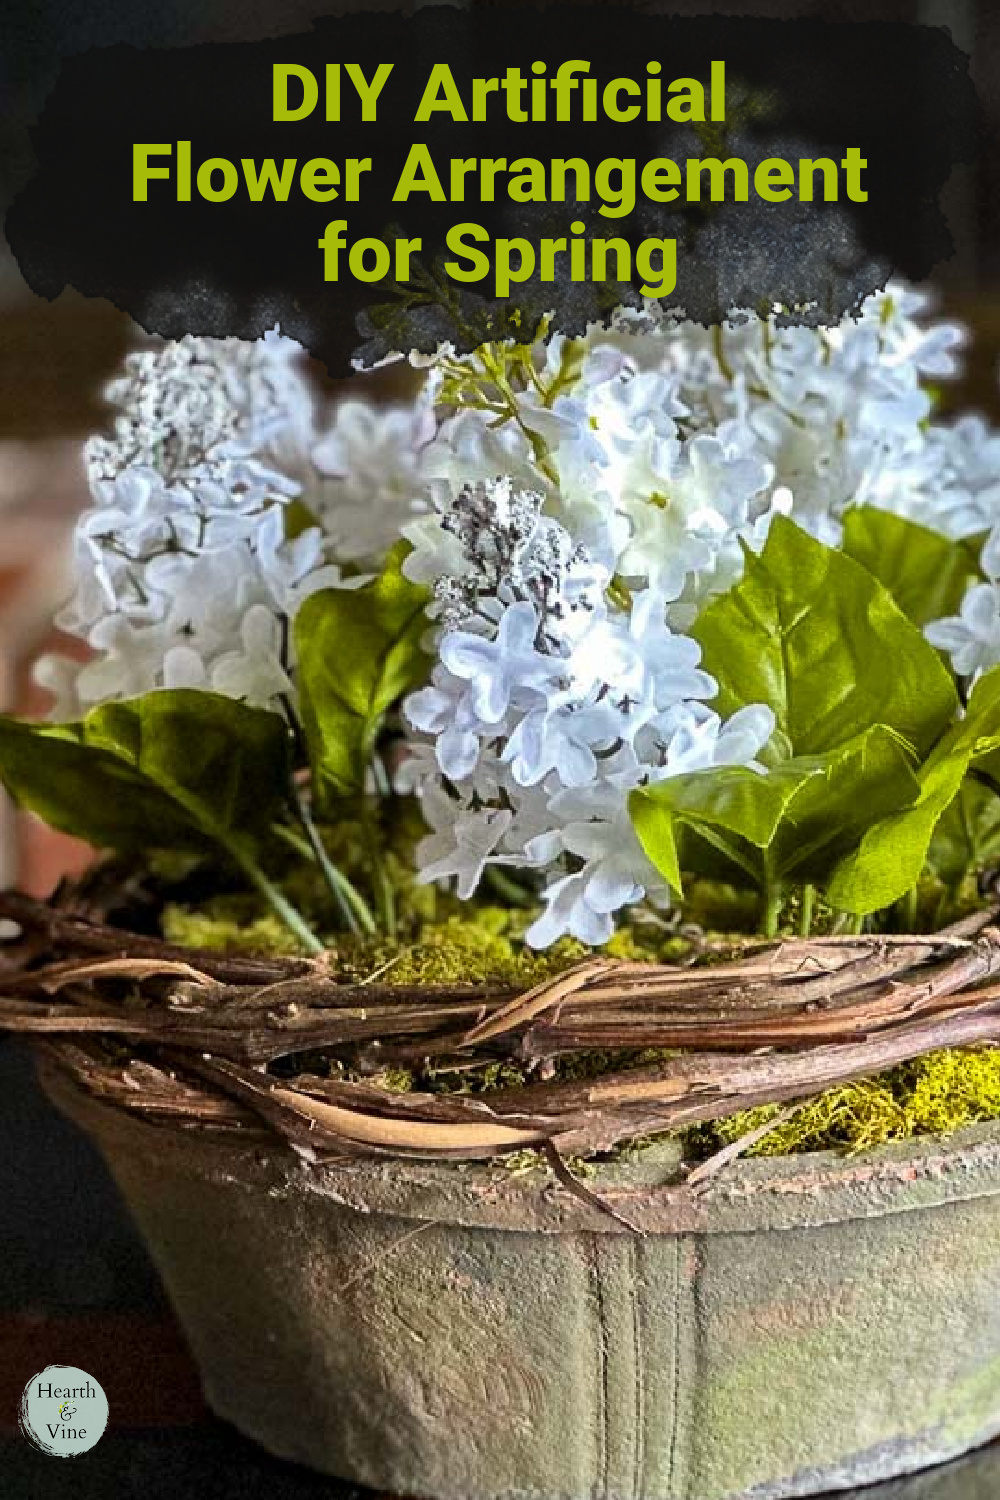 A close up image of an artificial flower arrangement with white lilacs, moss, grapevine in a clay pot.